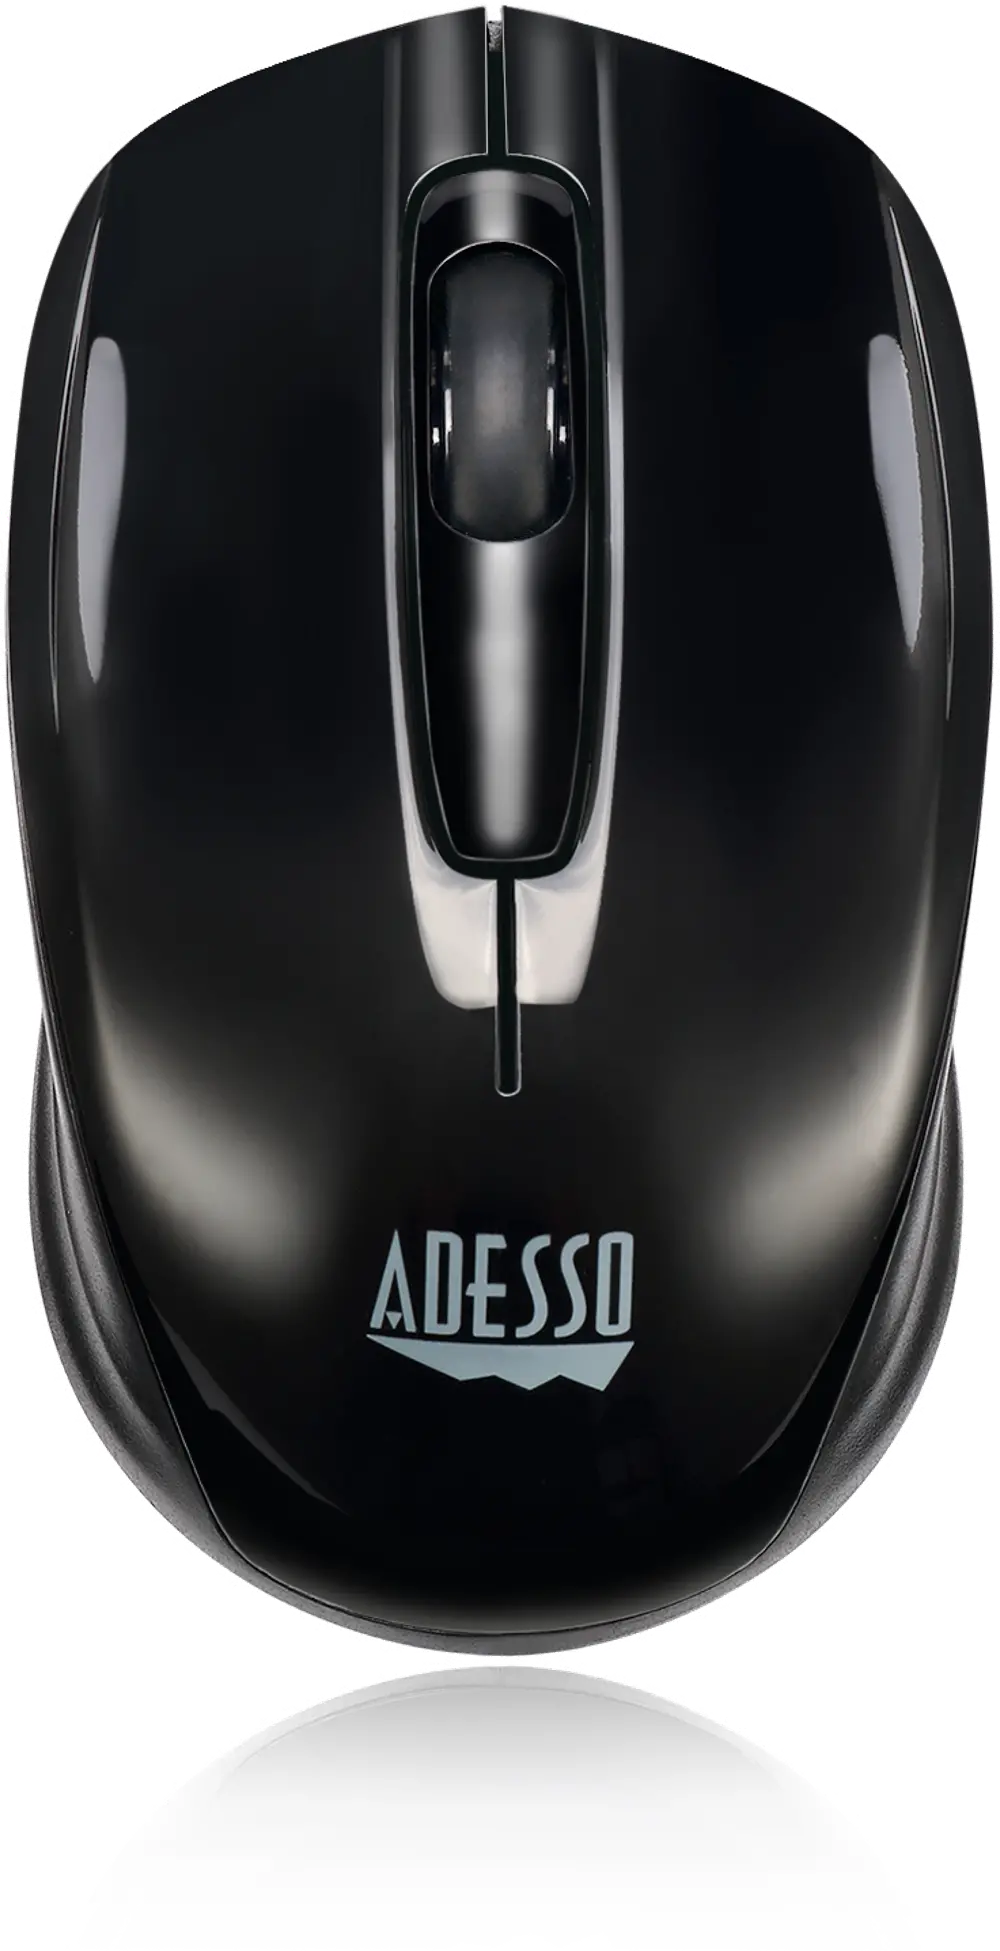 iMOUSE-S50 BLACK Adesso Black Wireless iMouse - S50-1